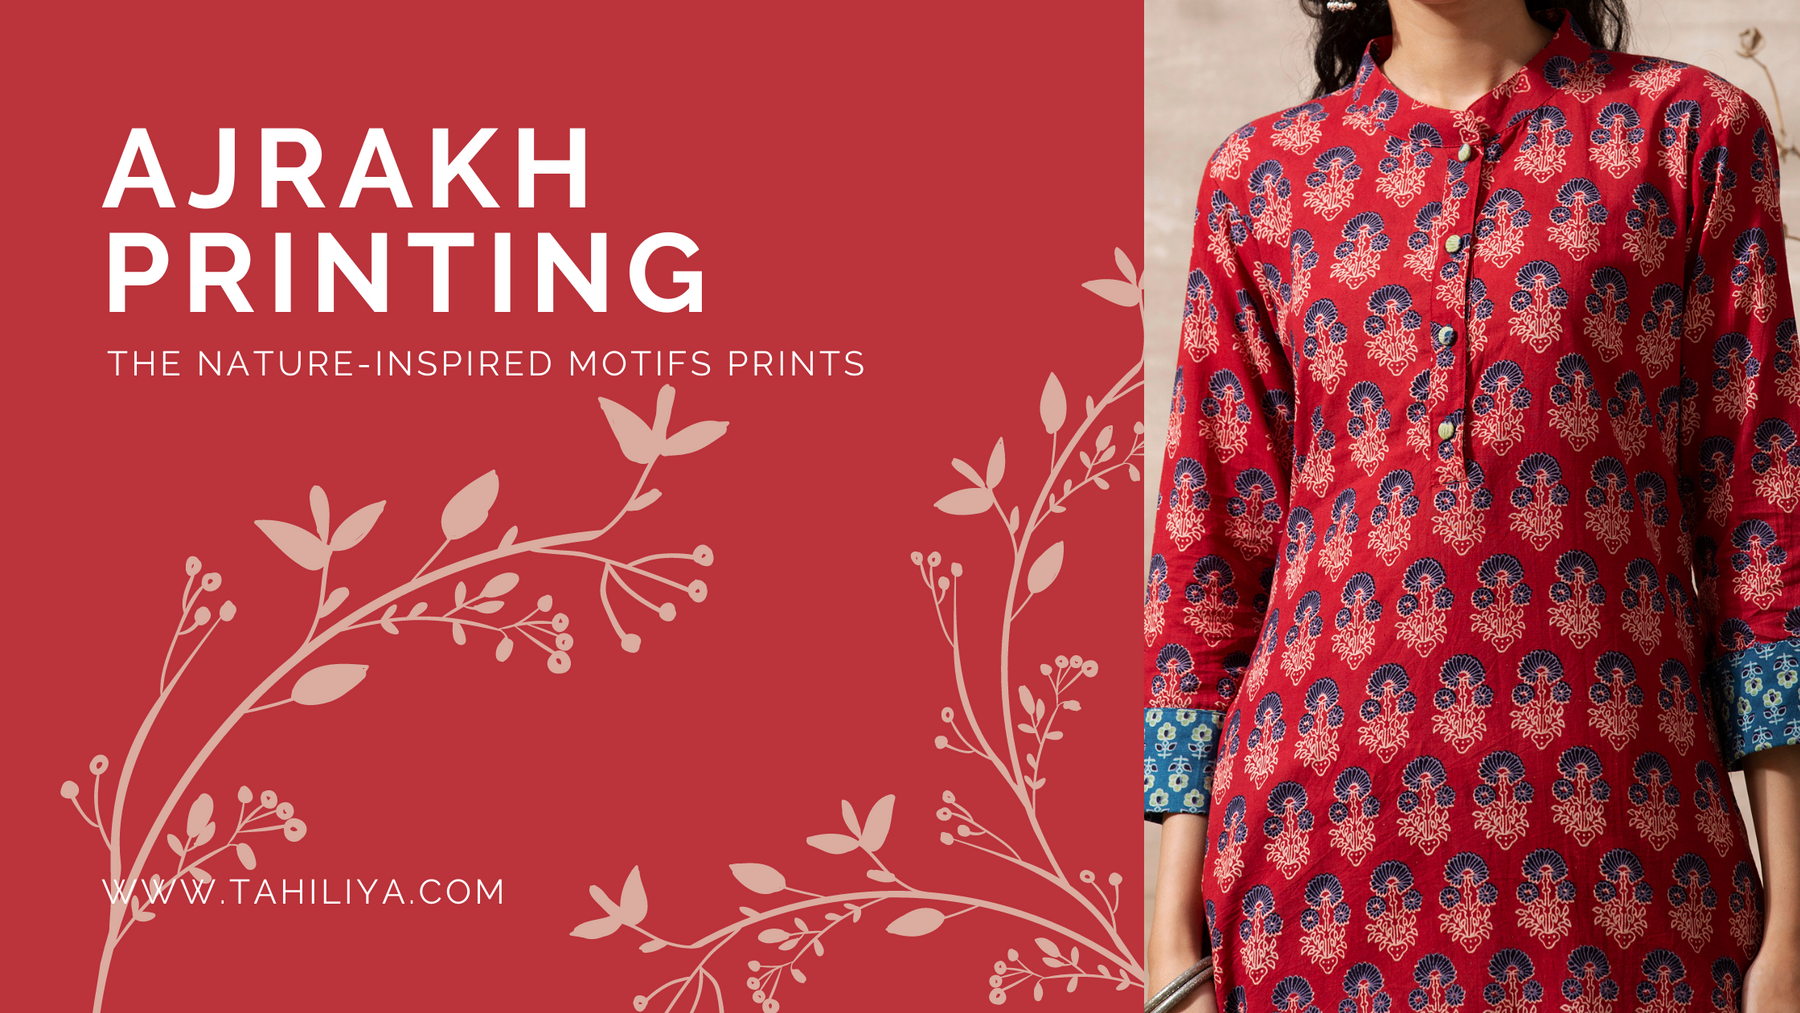 Ajrakh Printing - All you need to know